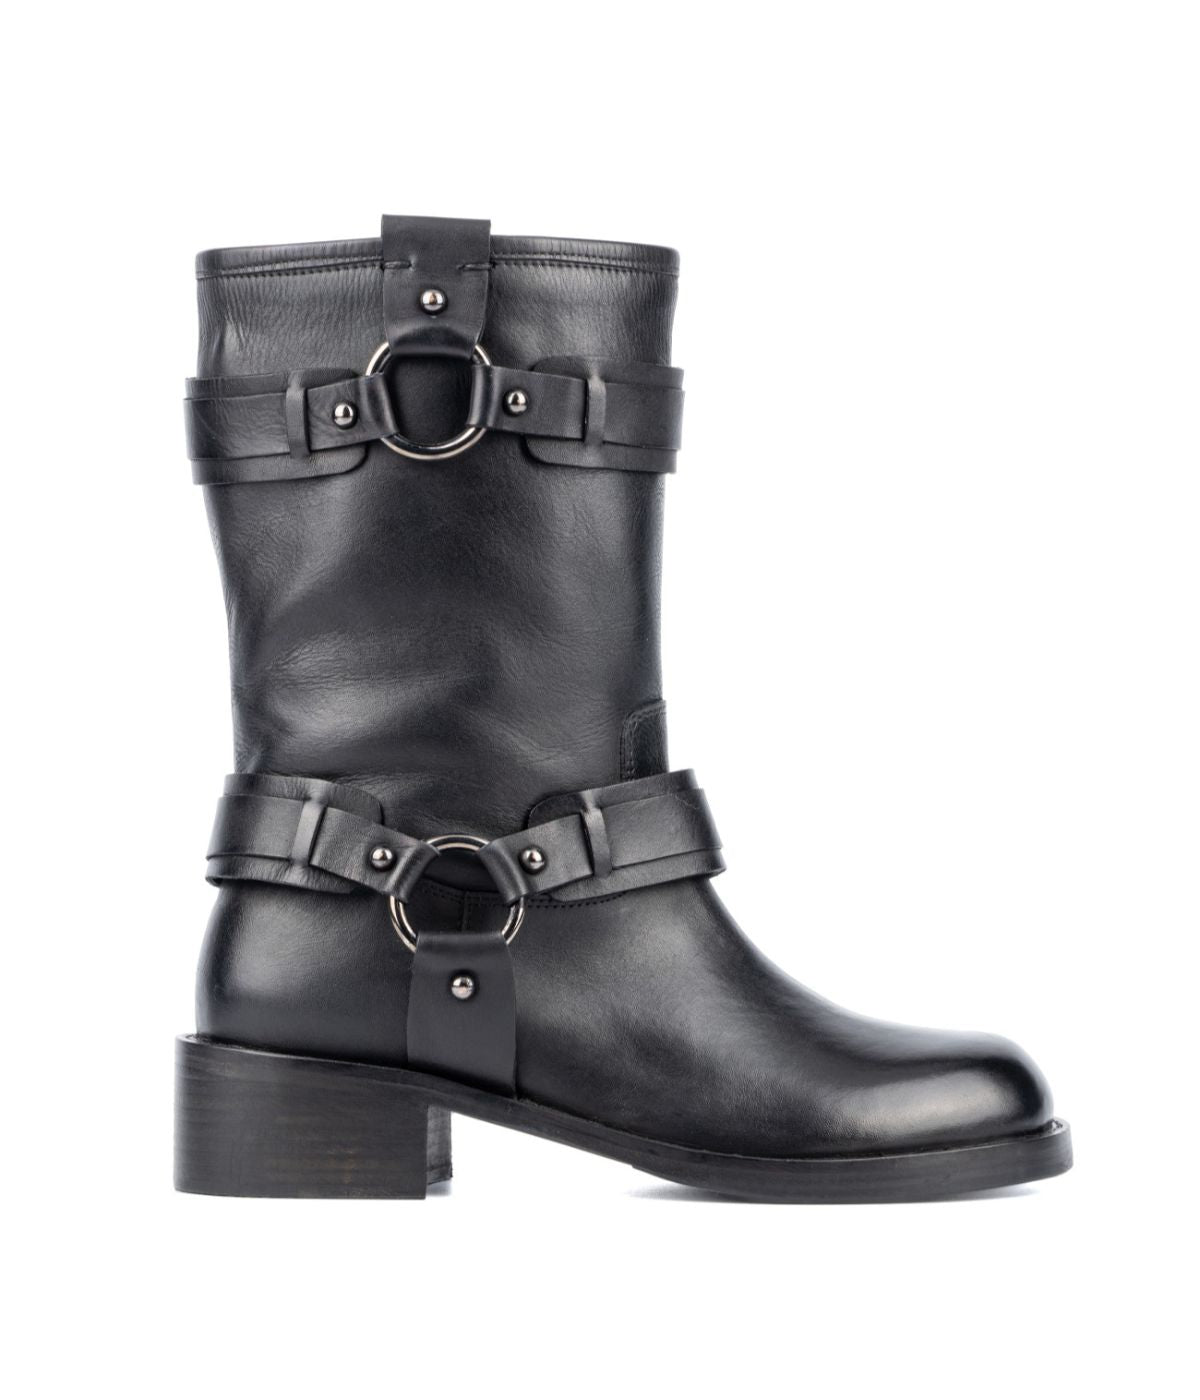 Vintage Foundry Co. Women's Augusta Mid Calf Boots Black